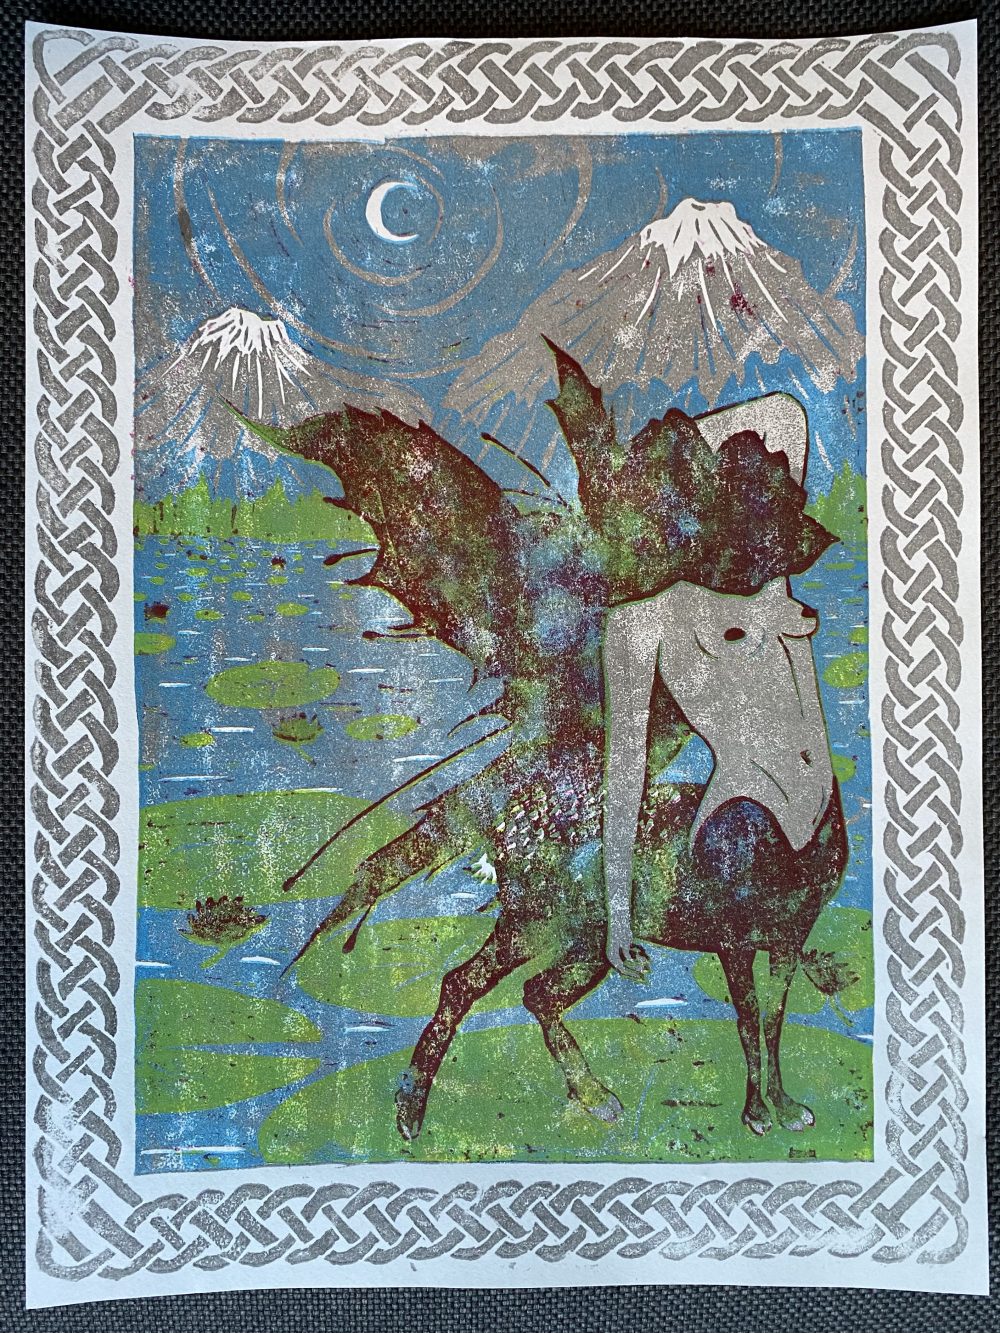 A reductive relief print made out of gray, blue, yellow, and red of a deer centar woman with a lotus head and fairy wings upon a lily pad in a lake with mountains and a night sky in the background.